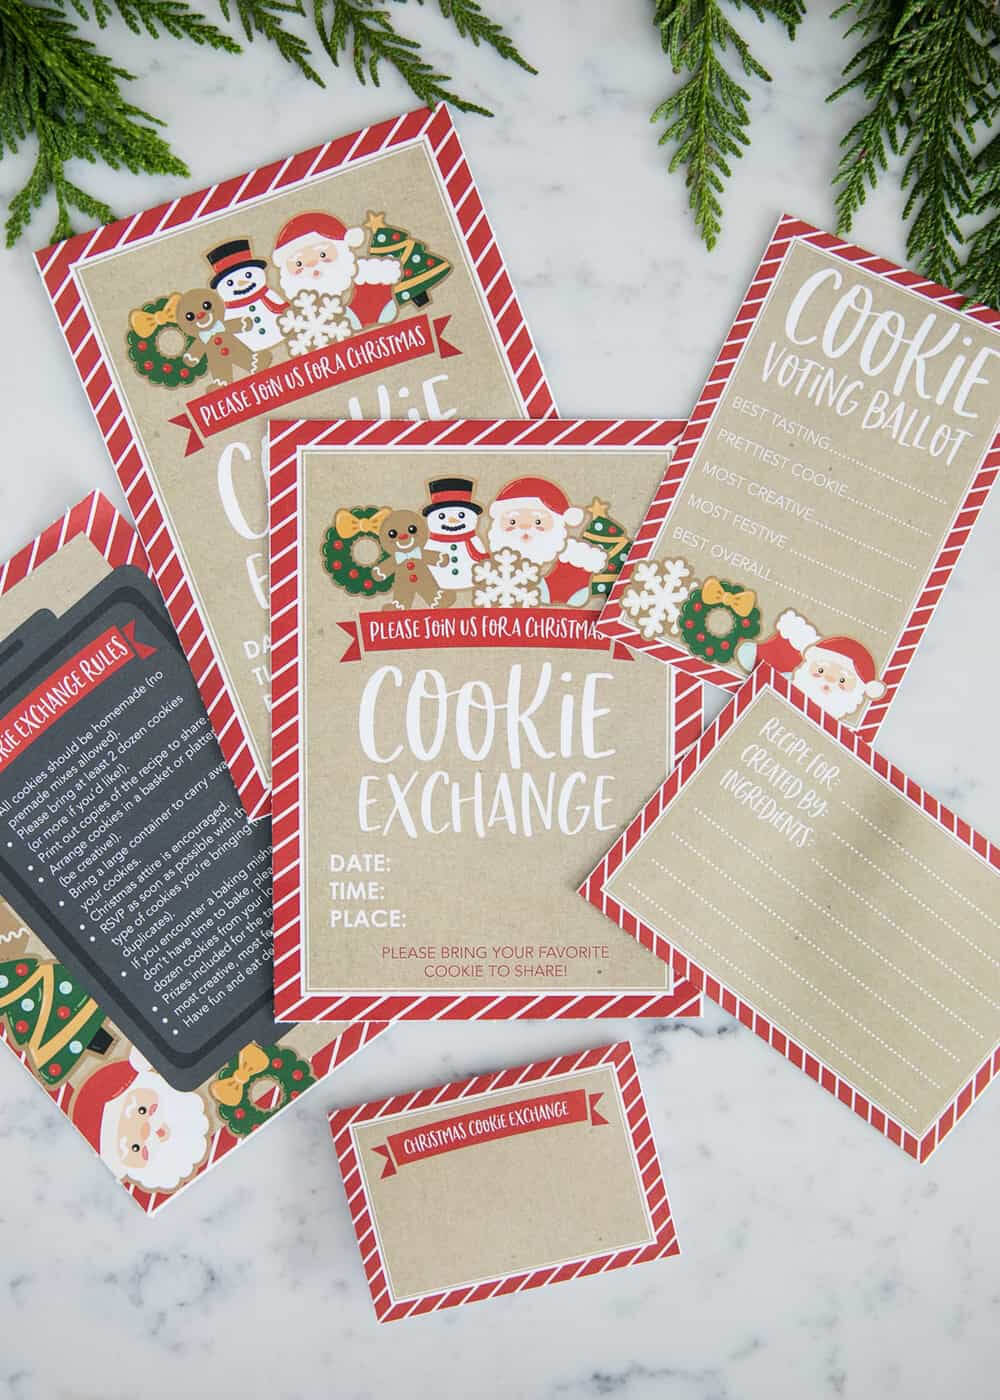 How To Host A Cookie Exchange (W/ Free Printables!) – I Throughout Cookie Exchange Recipe Card Template